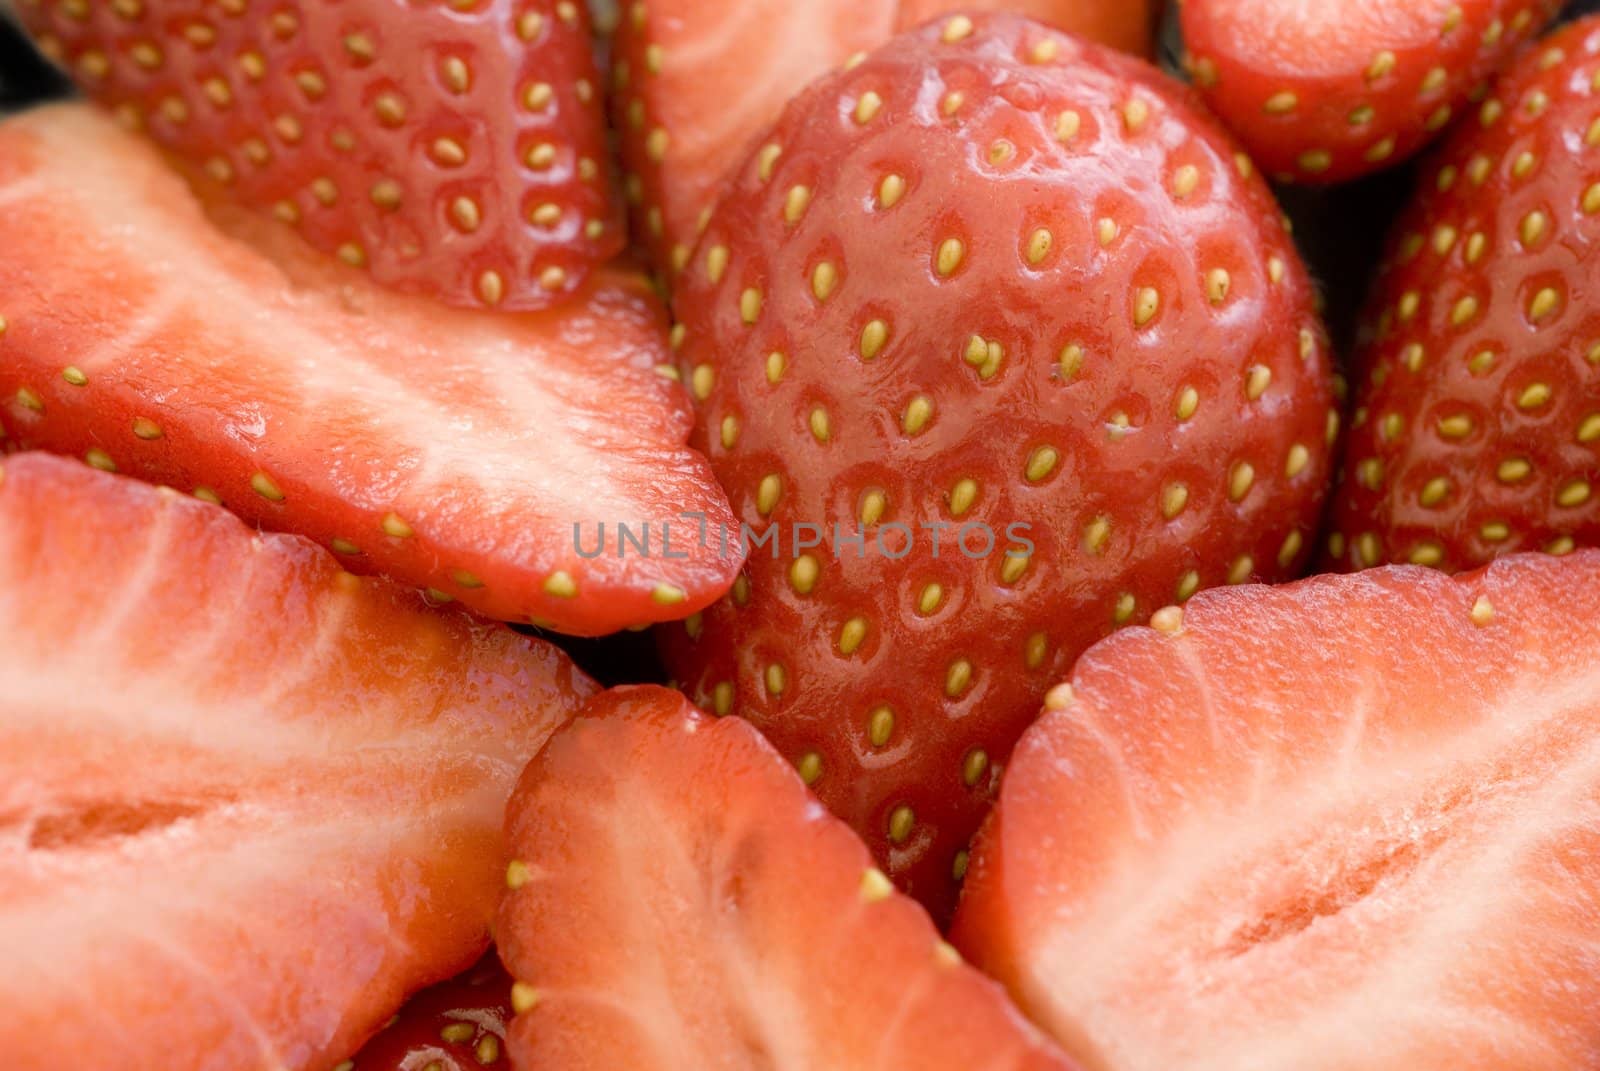 sliced strawberries by stockarch